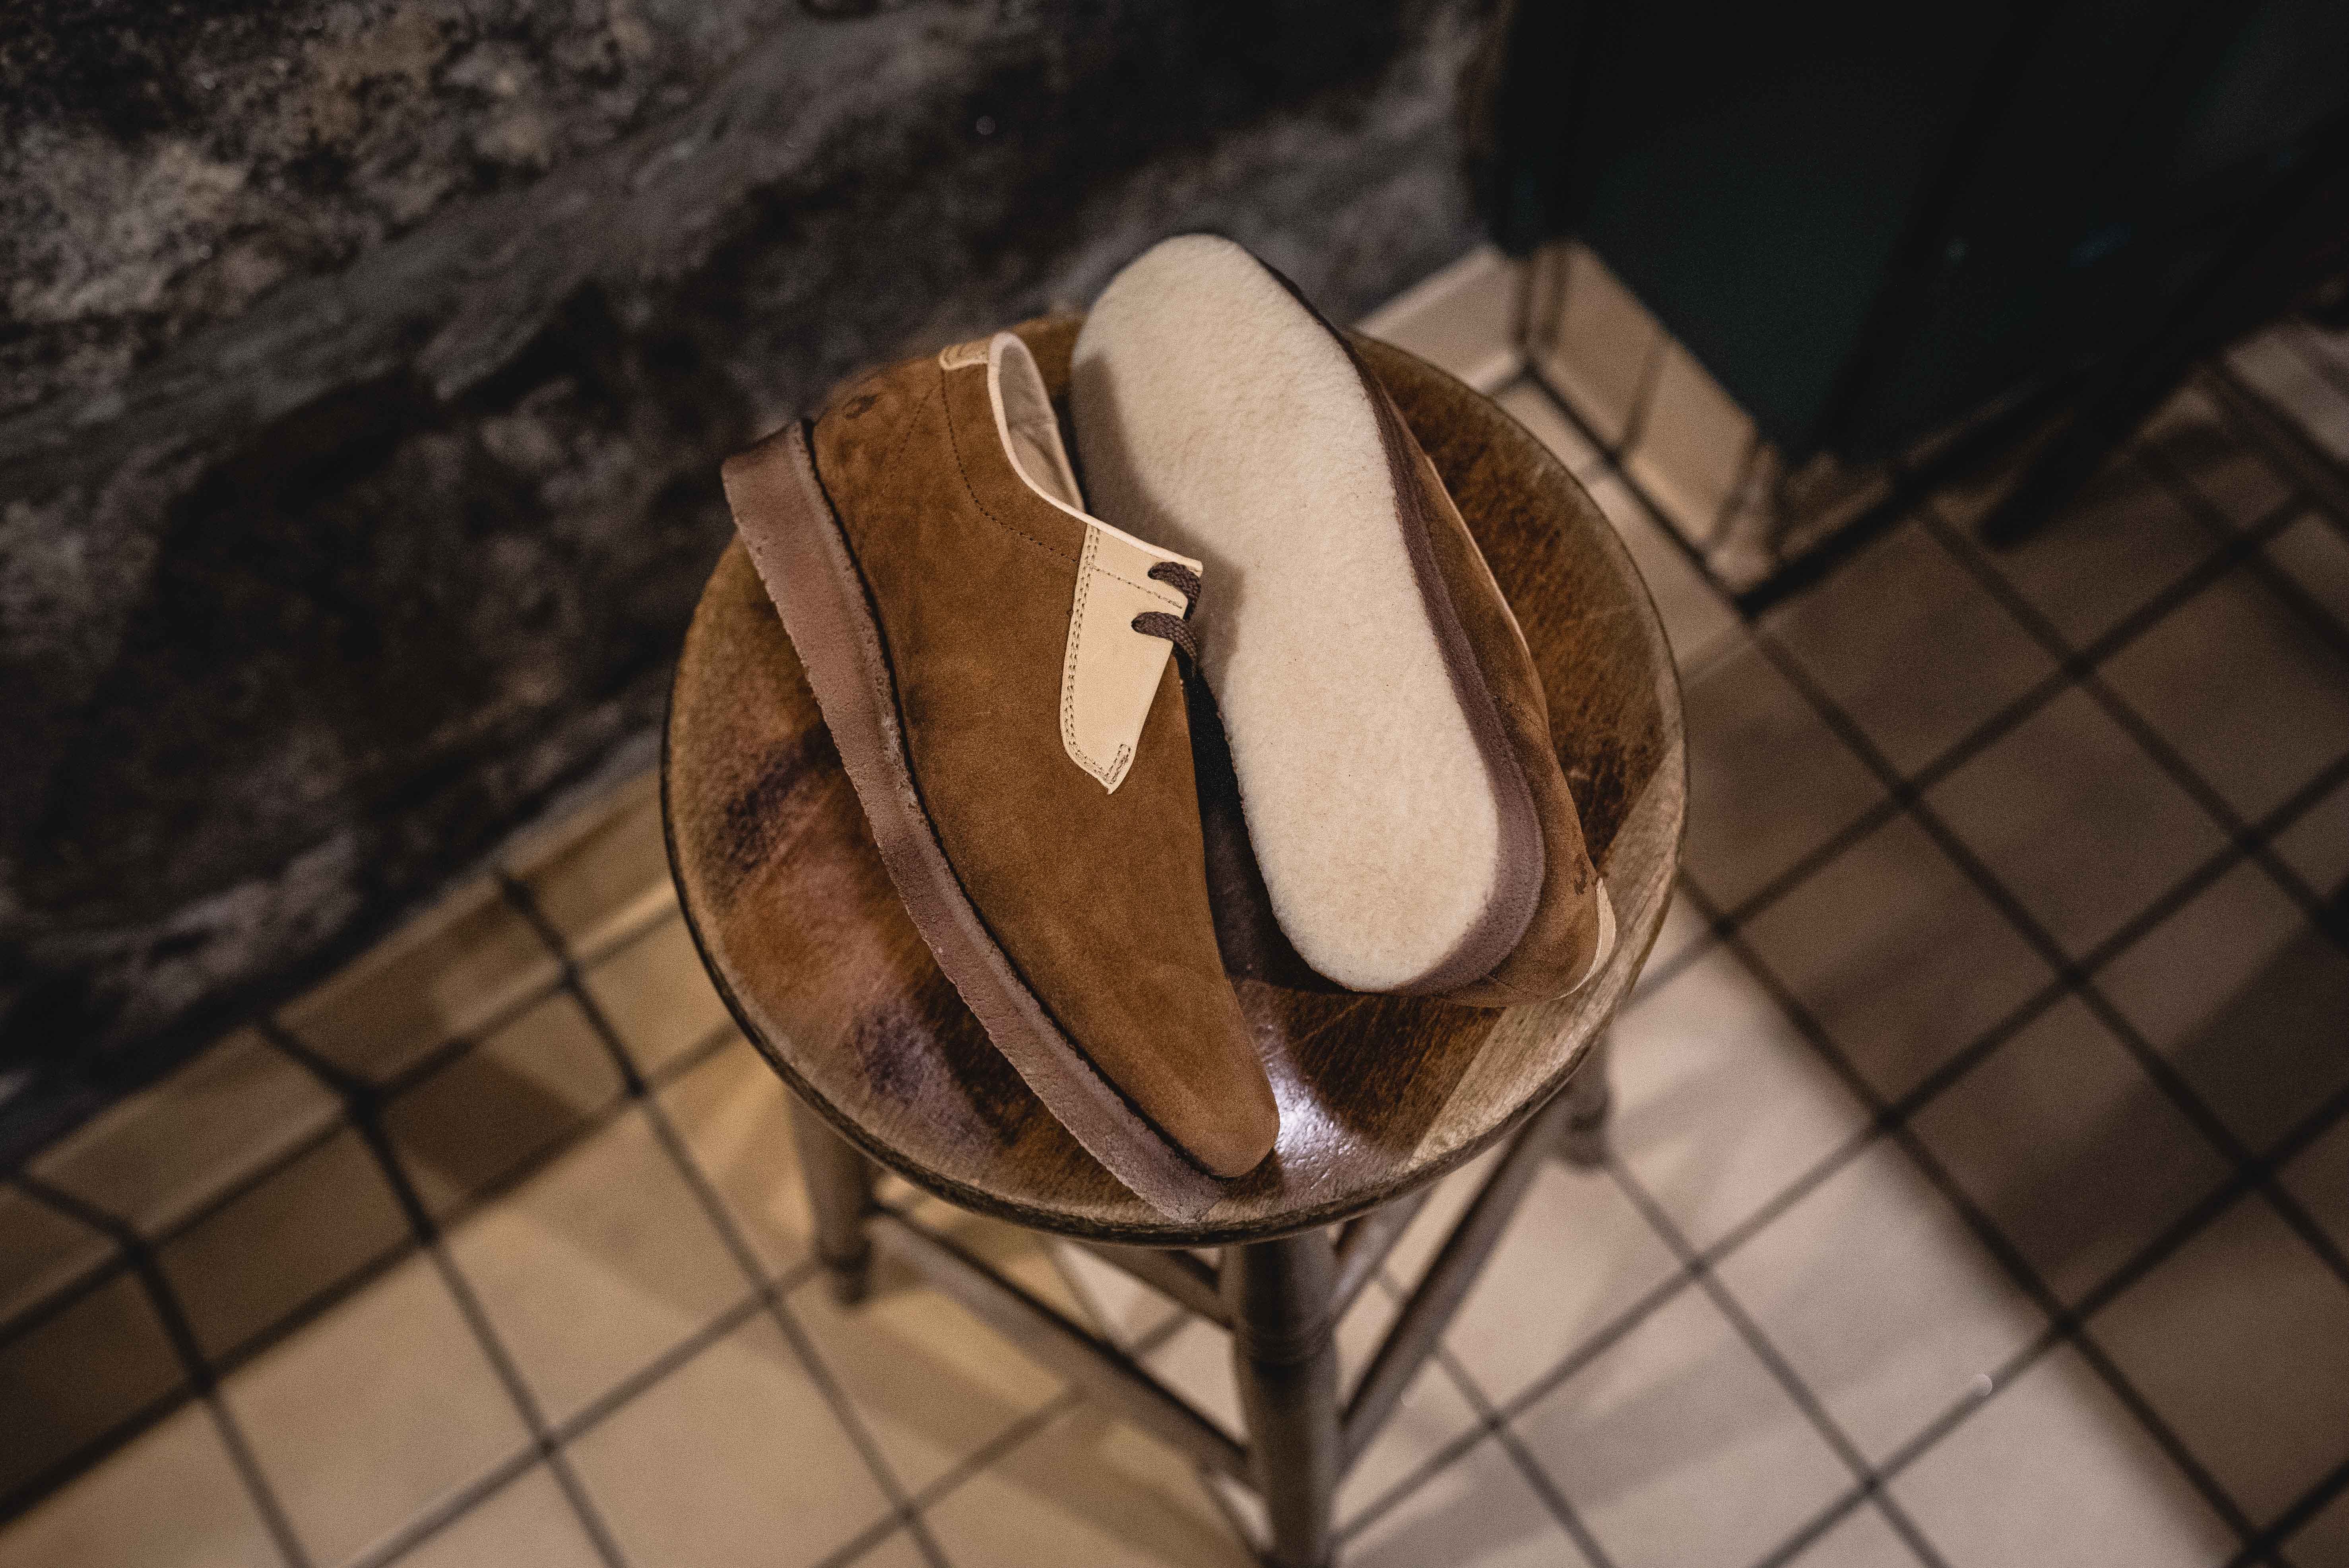 Hanon x Padmore & Barnes P500 Plain Toe Collaboration Release Footwear Silhouette Old School Vintage Traditional Wallabee Lookbooks Kilkenny, Ireland Hand Made Limited Edition